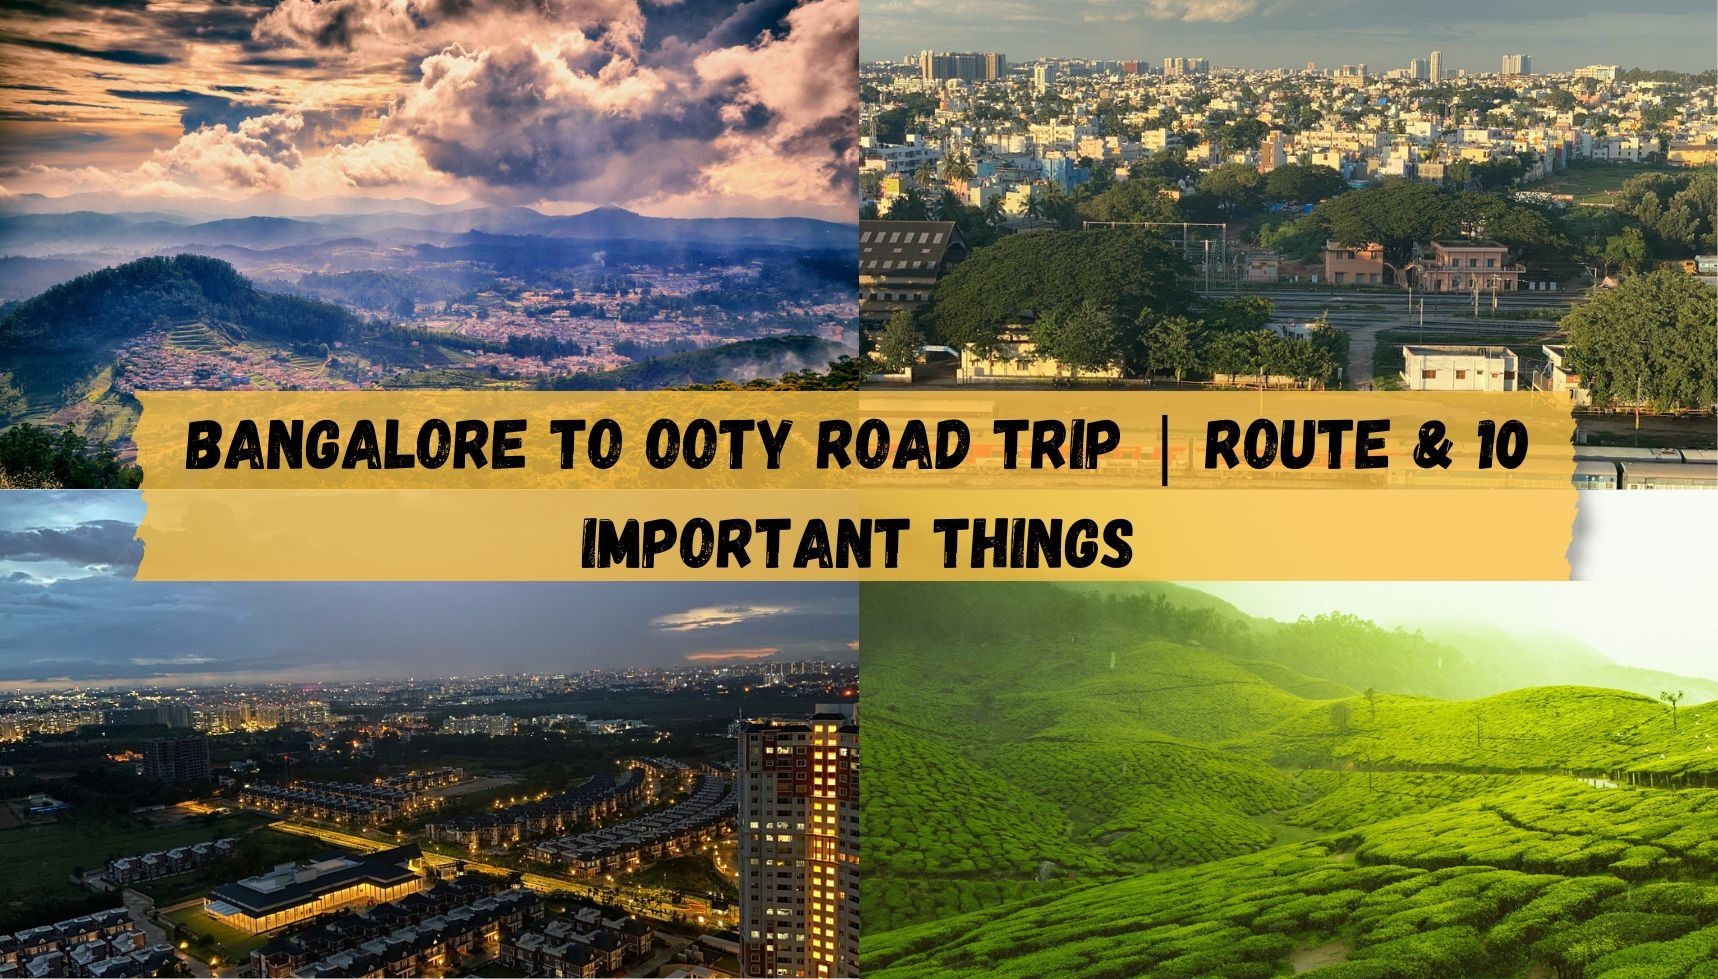 The Ultimate Bangalore to Ooty Road Trip: Route Guide & 10 Essential Stops